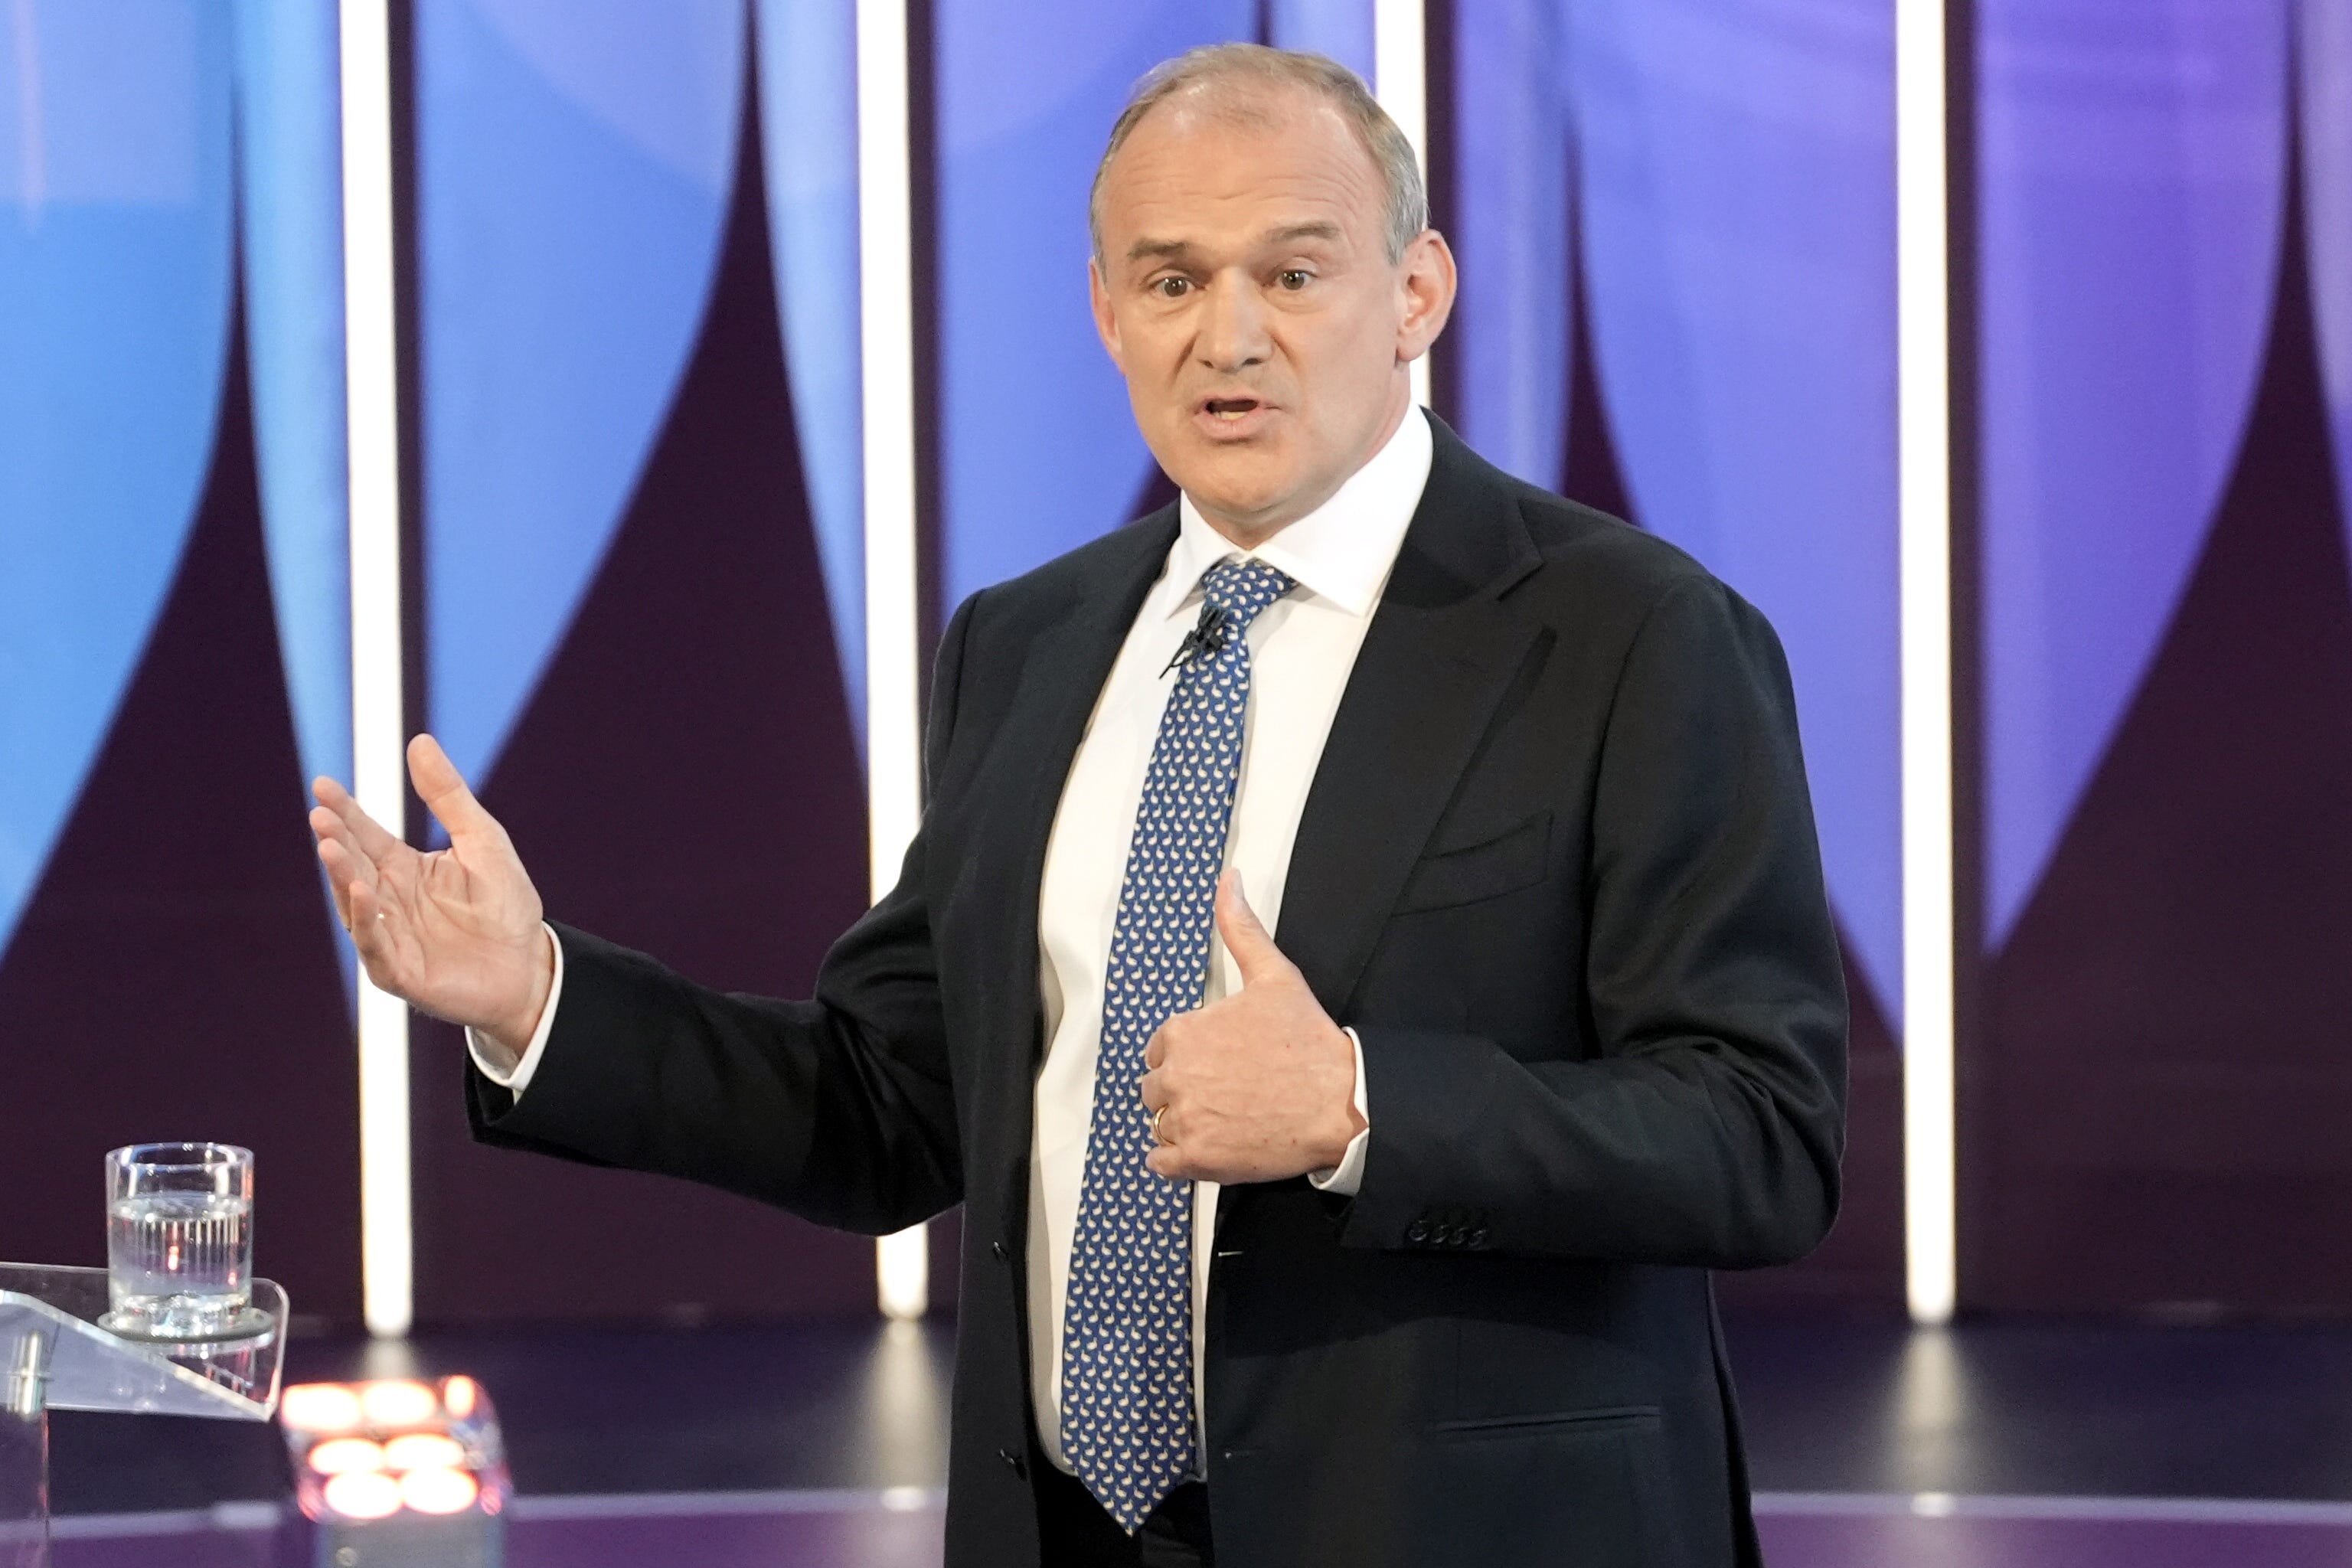 Liberal Democrats leader Sir Ed Davey speaking during a BBC Question Time Leaders’ Special in York (Stefan Rousseau/PA)